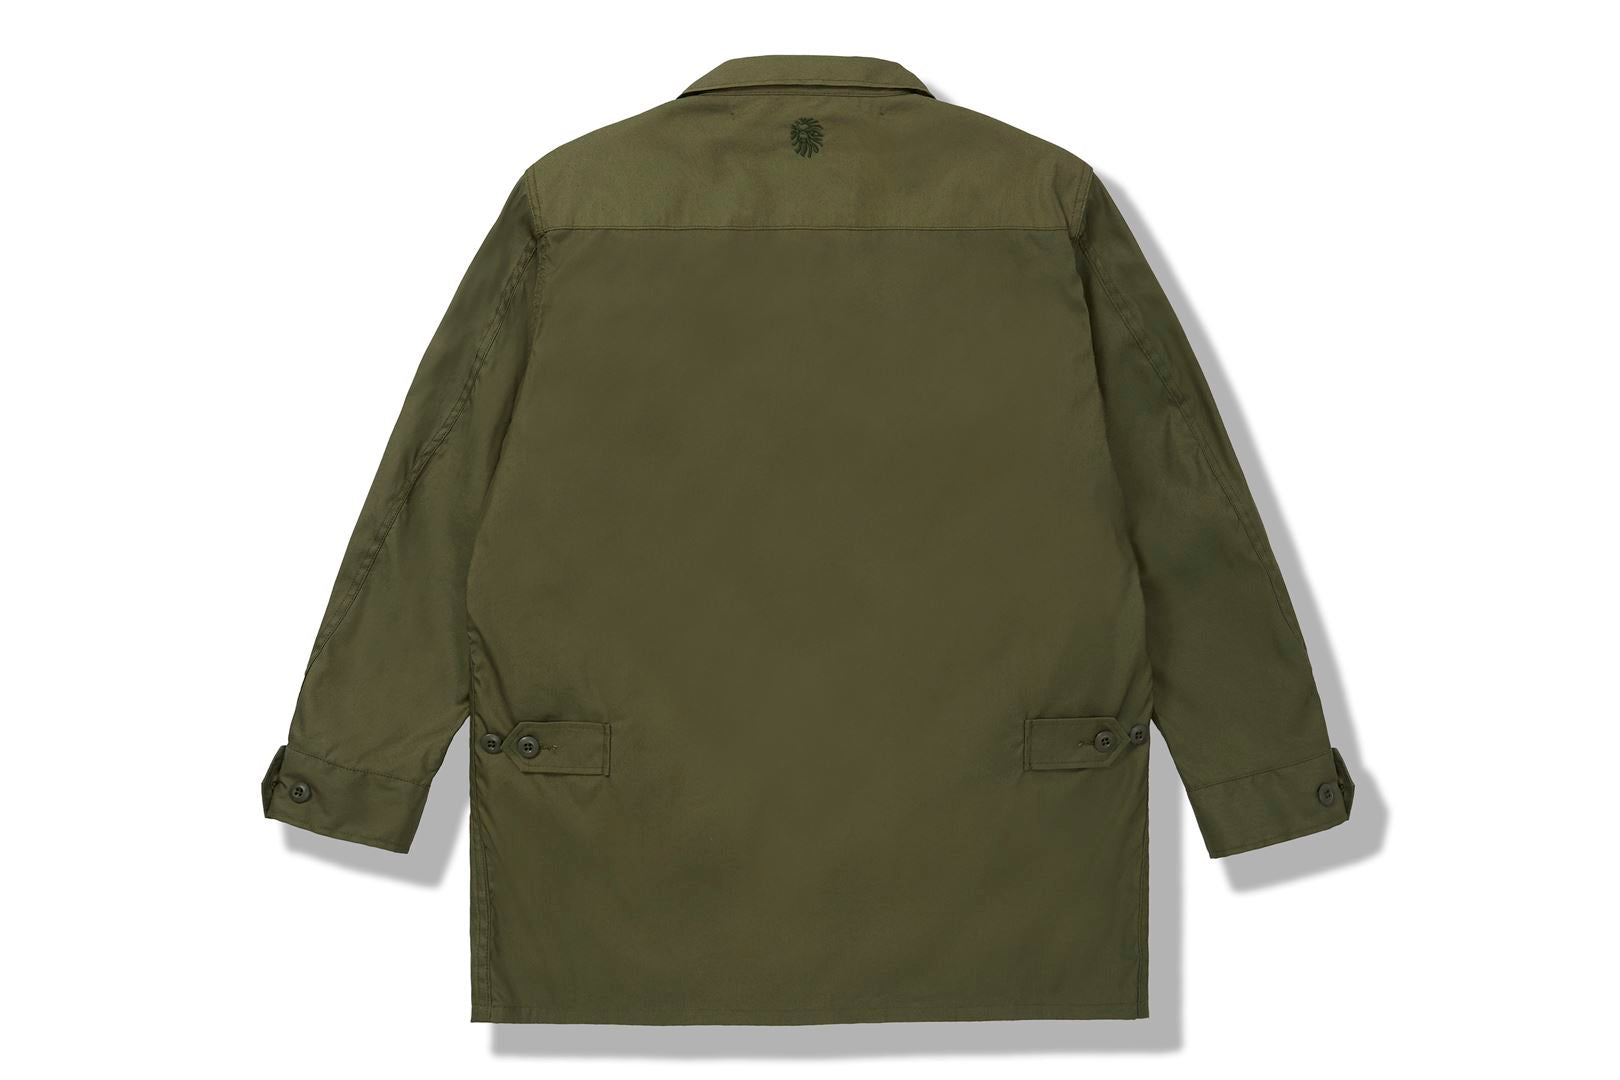 BAPE BLACK® X ROCKY MOUNTAIN FEATHERBED MILITARY JACKET WITH LINER